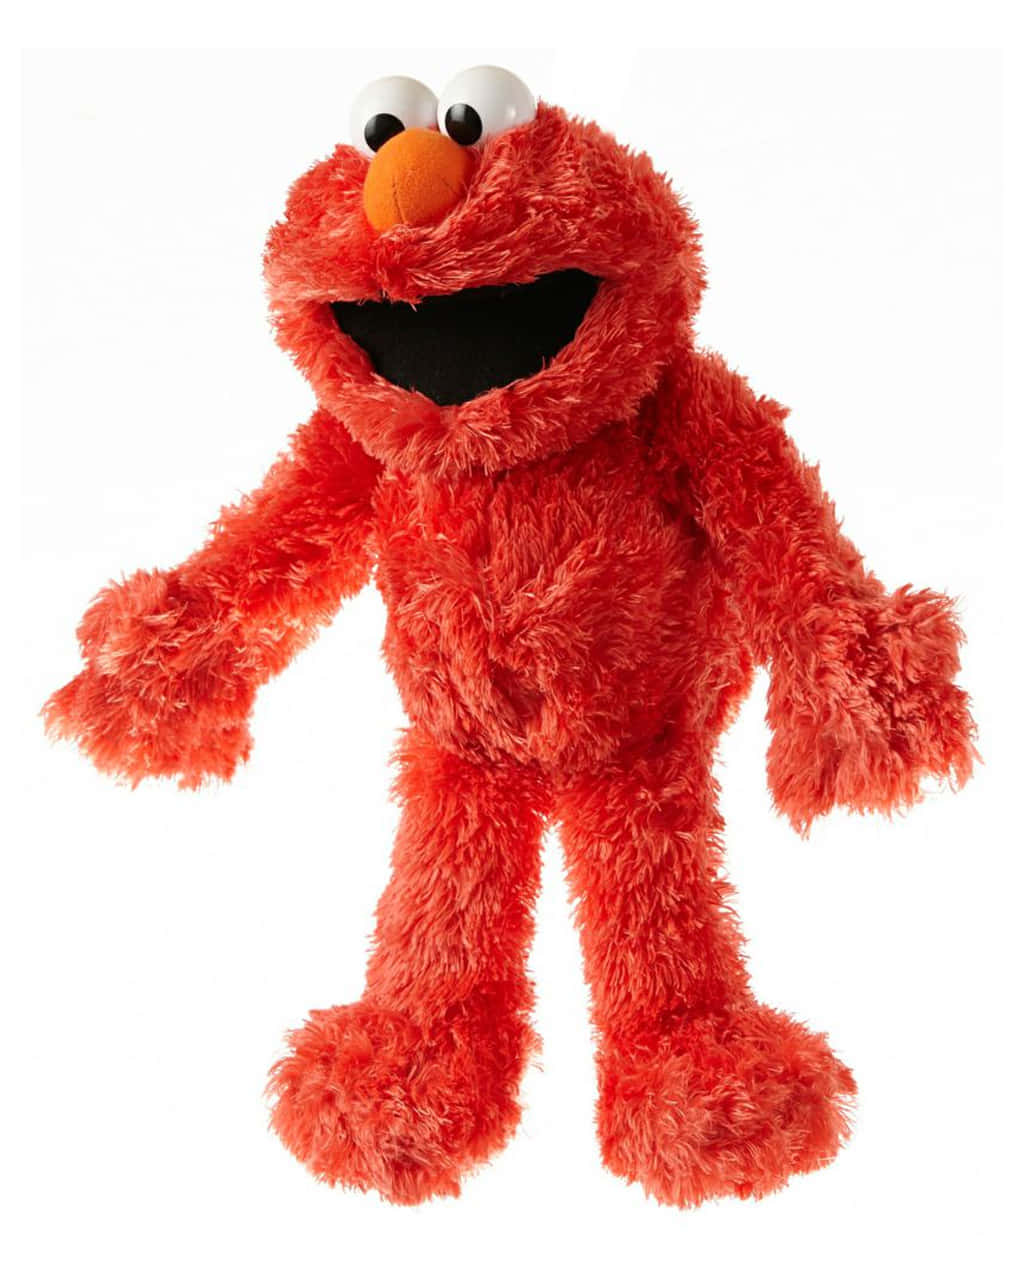 "It's time to have some fun with Elmo!"